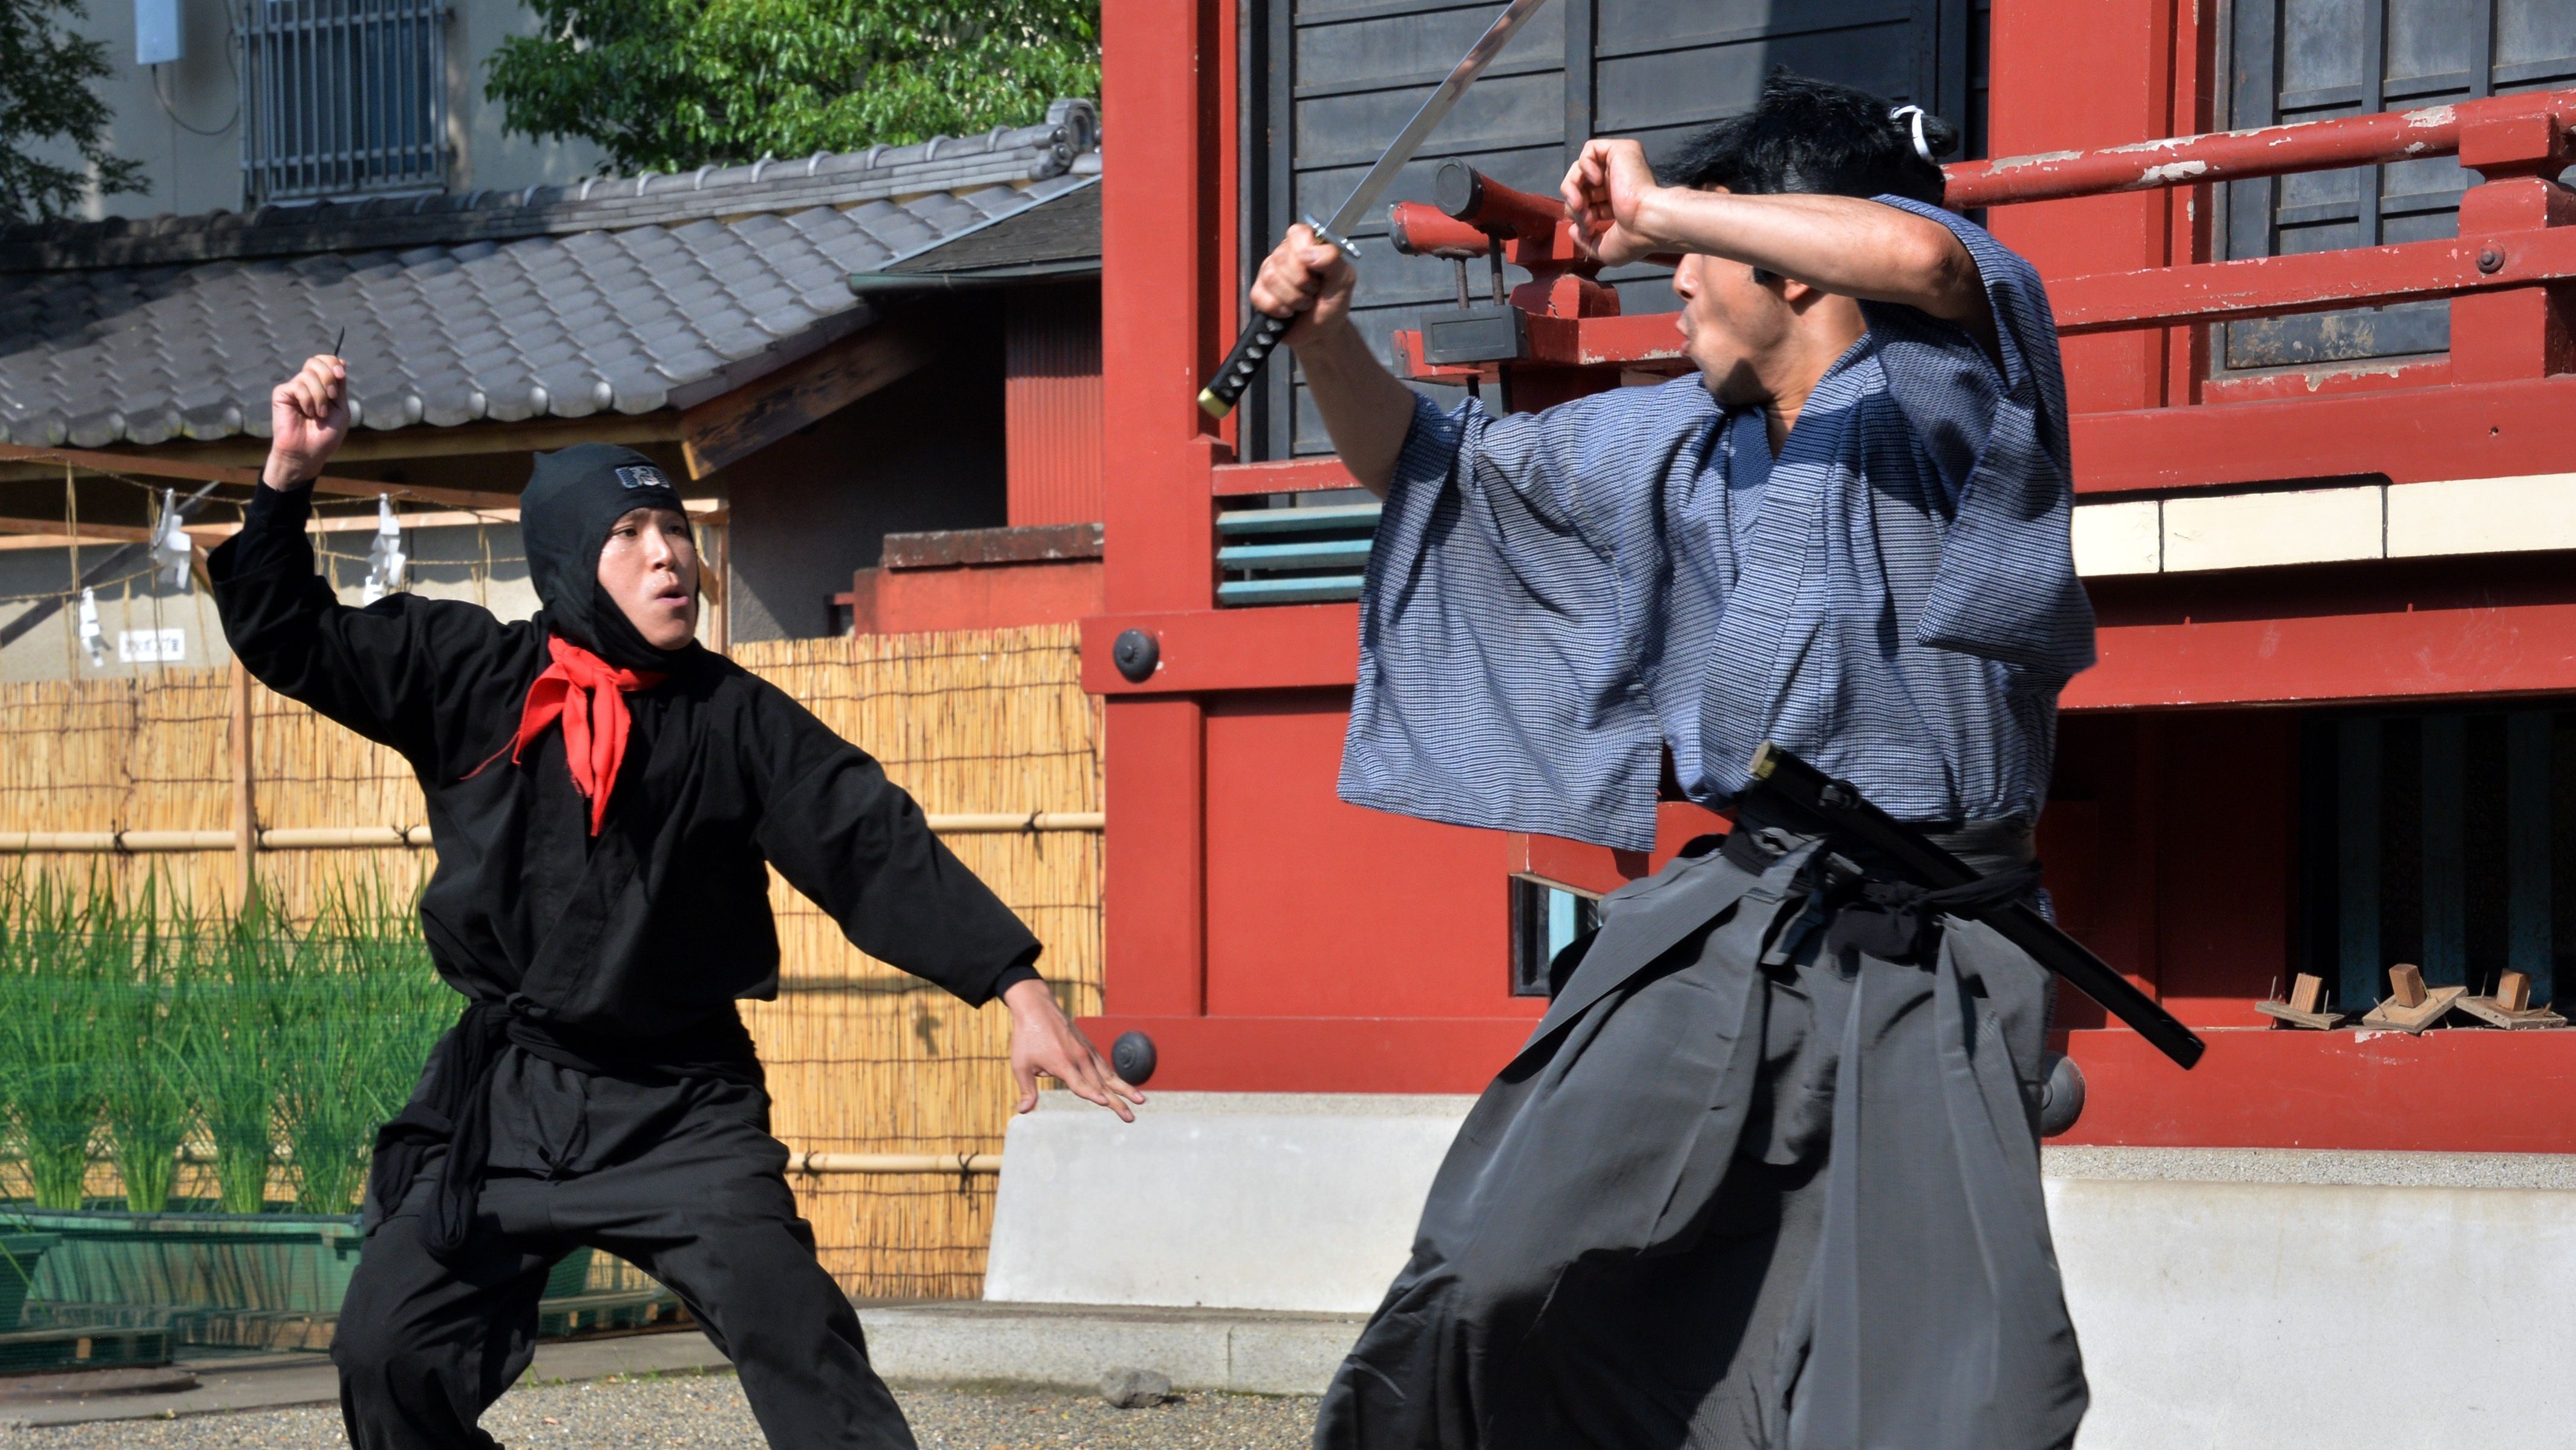 Members of a pantomime group clad in a samurai, left, and ninja costumes perform in Tokyo.